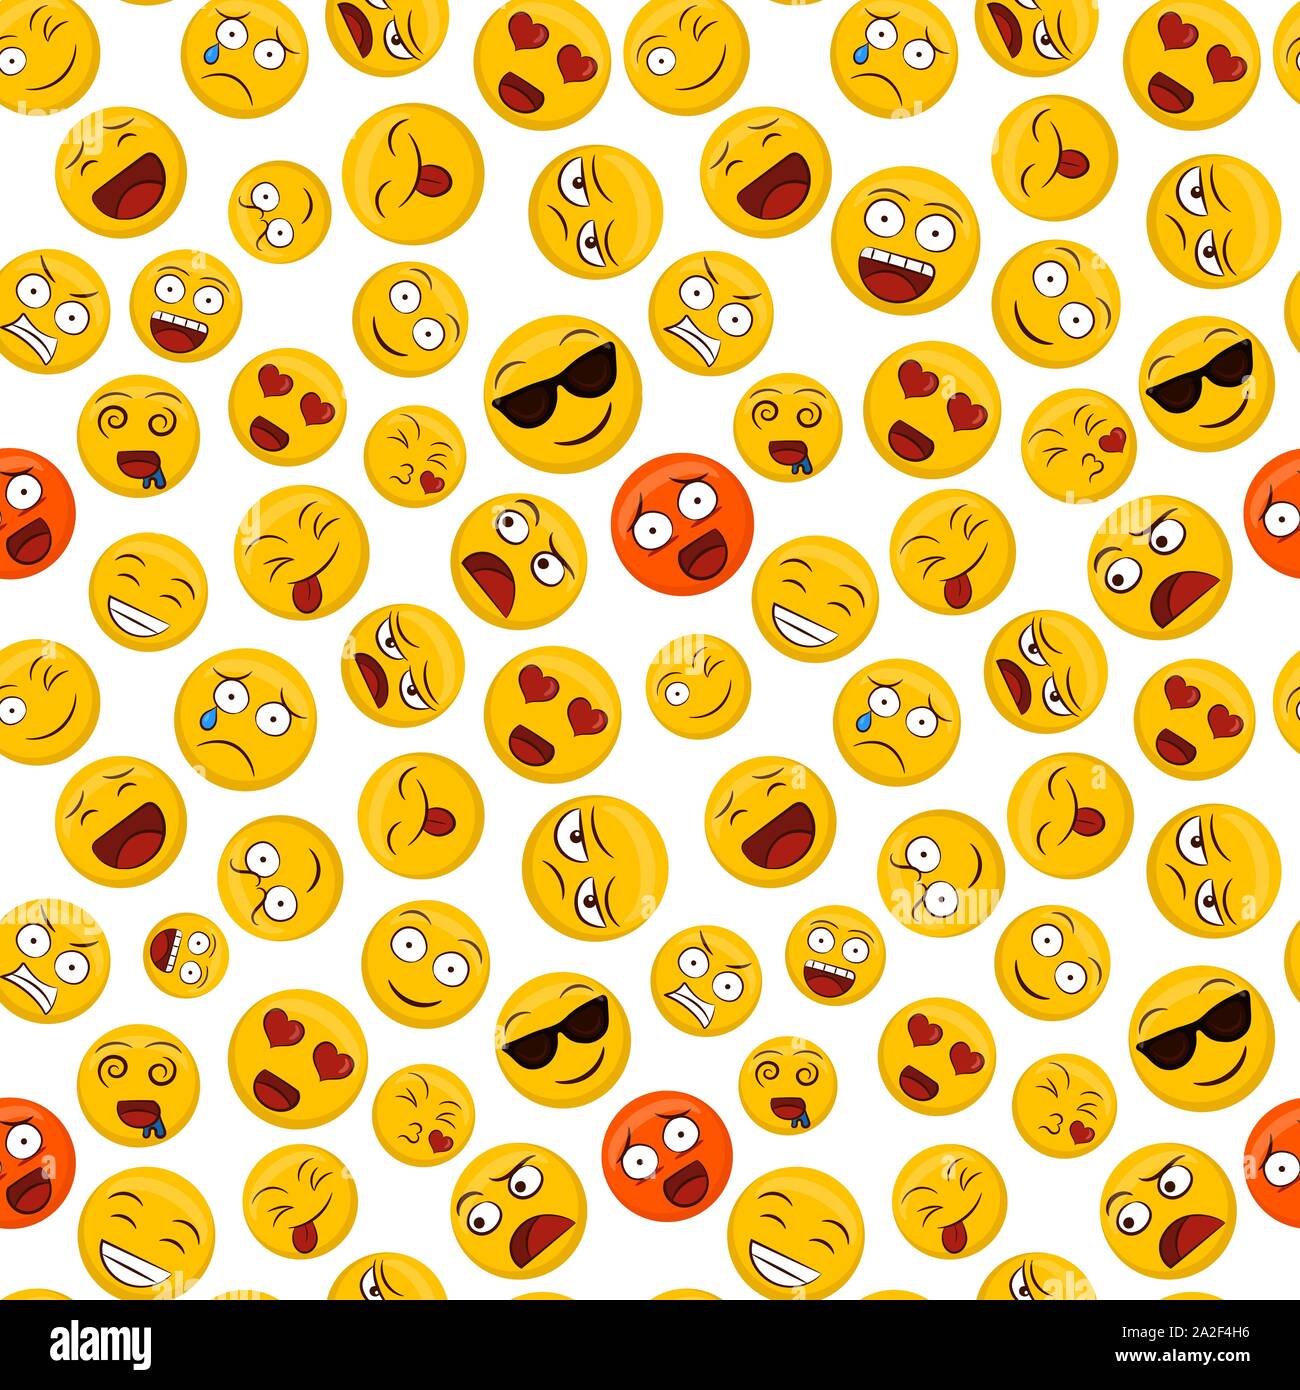 Funny yellow smiley face seamless pattern, social chat emoticon background with fun reactions include heart eyes, laugh and happy emotion. Stock Vector